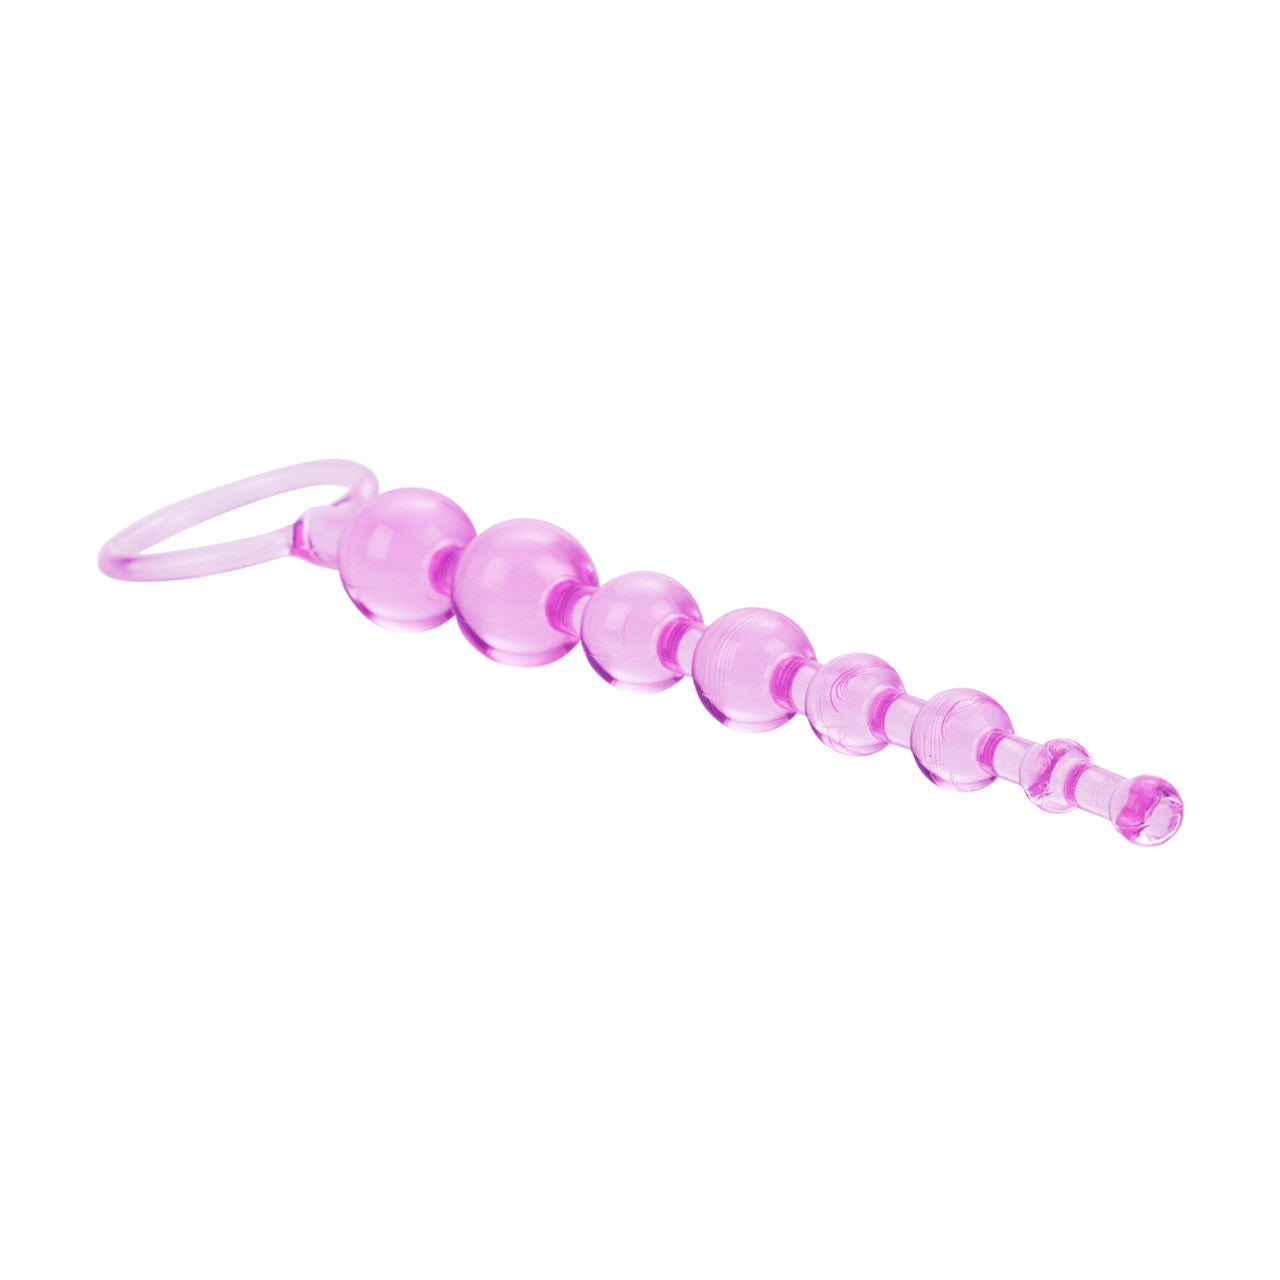 CalExotics First Time Love Beads - Pink - Thorn & Feather Sex Toy Canada